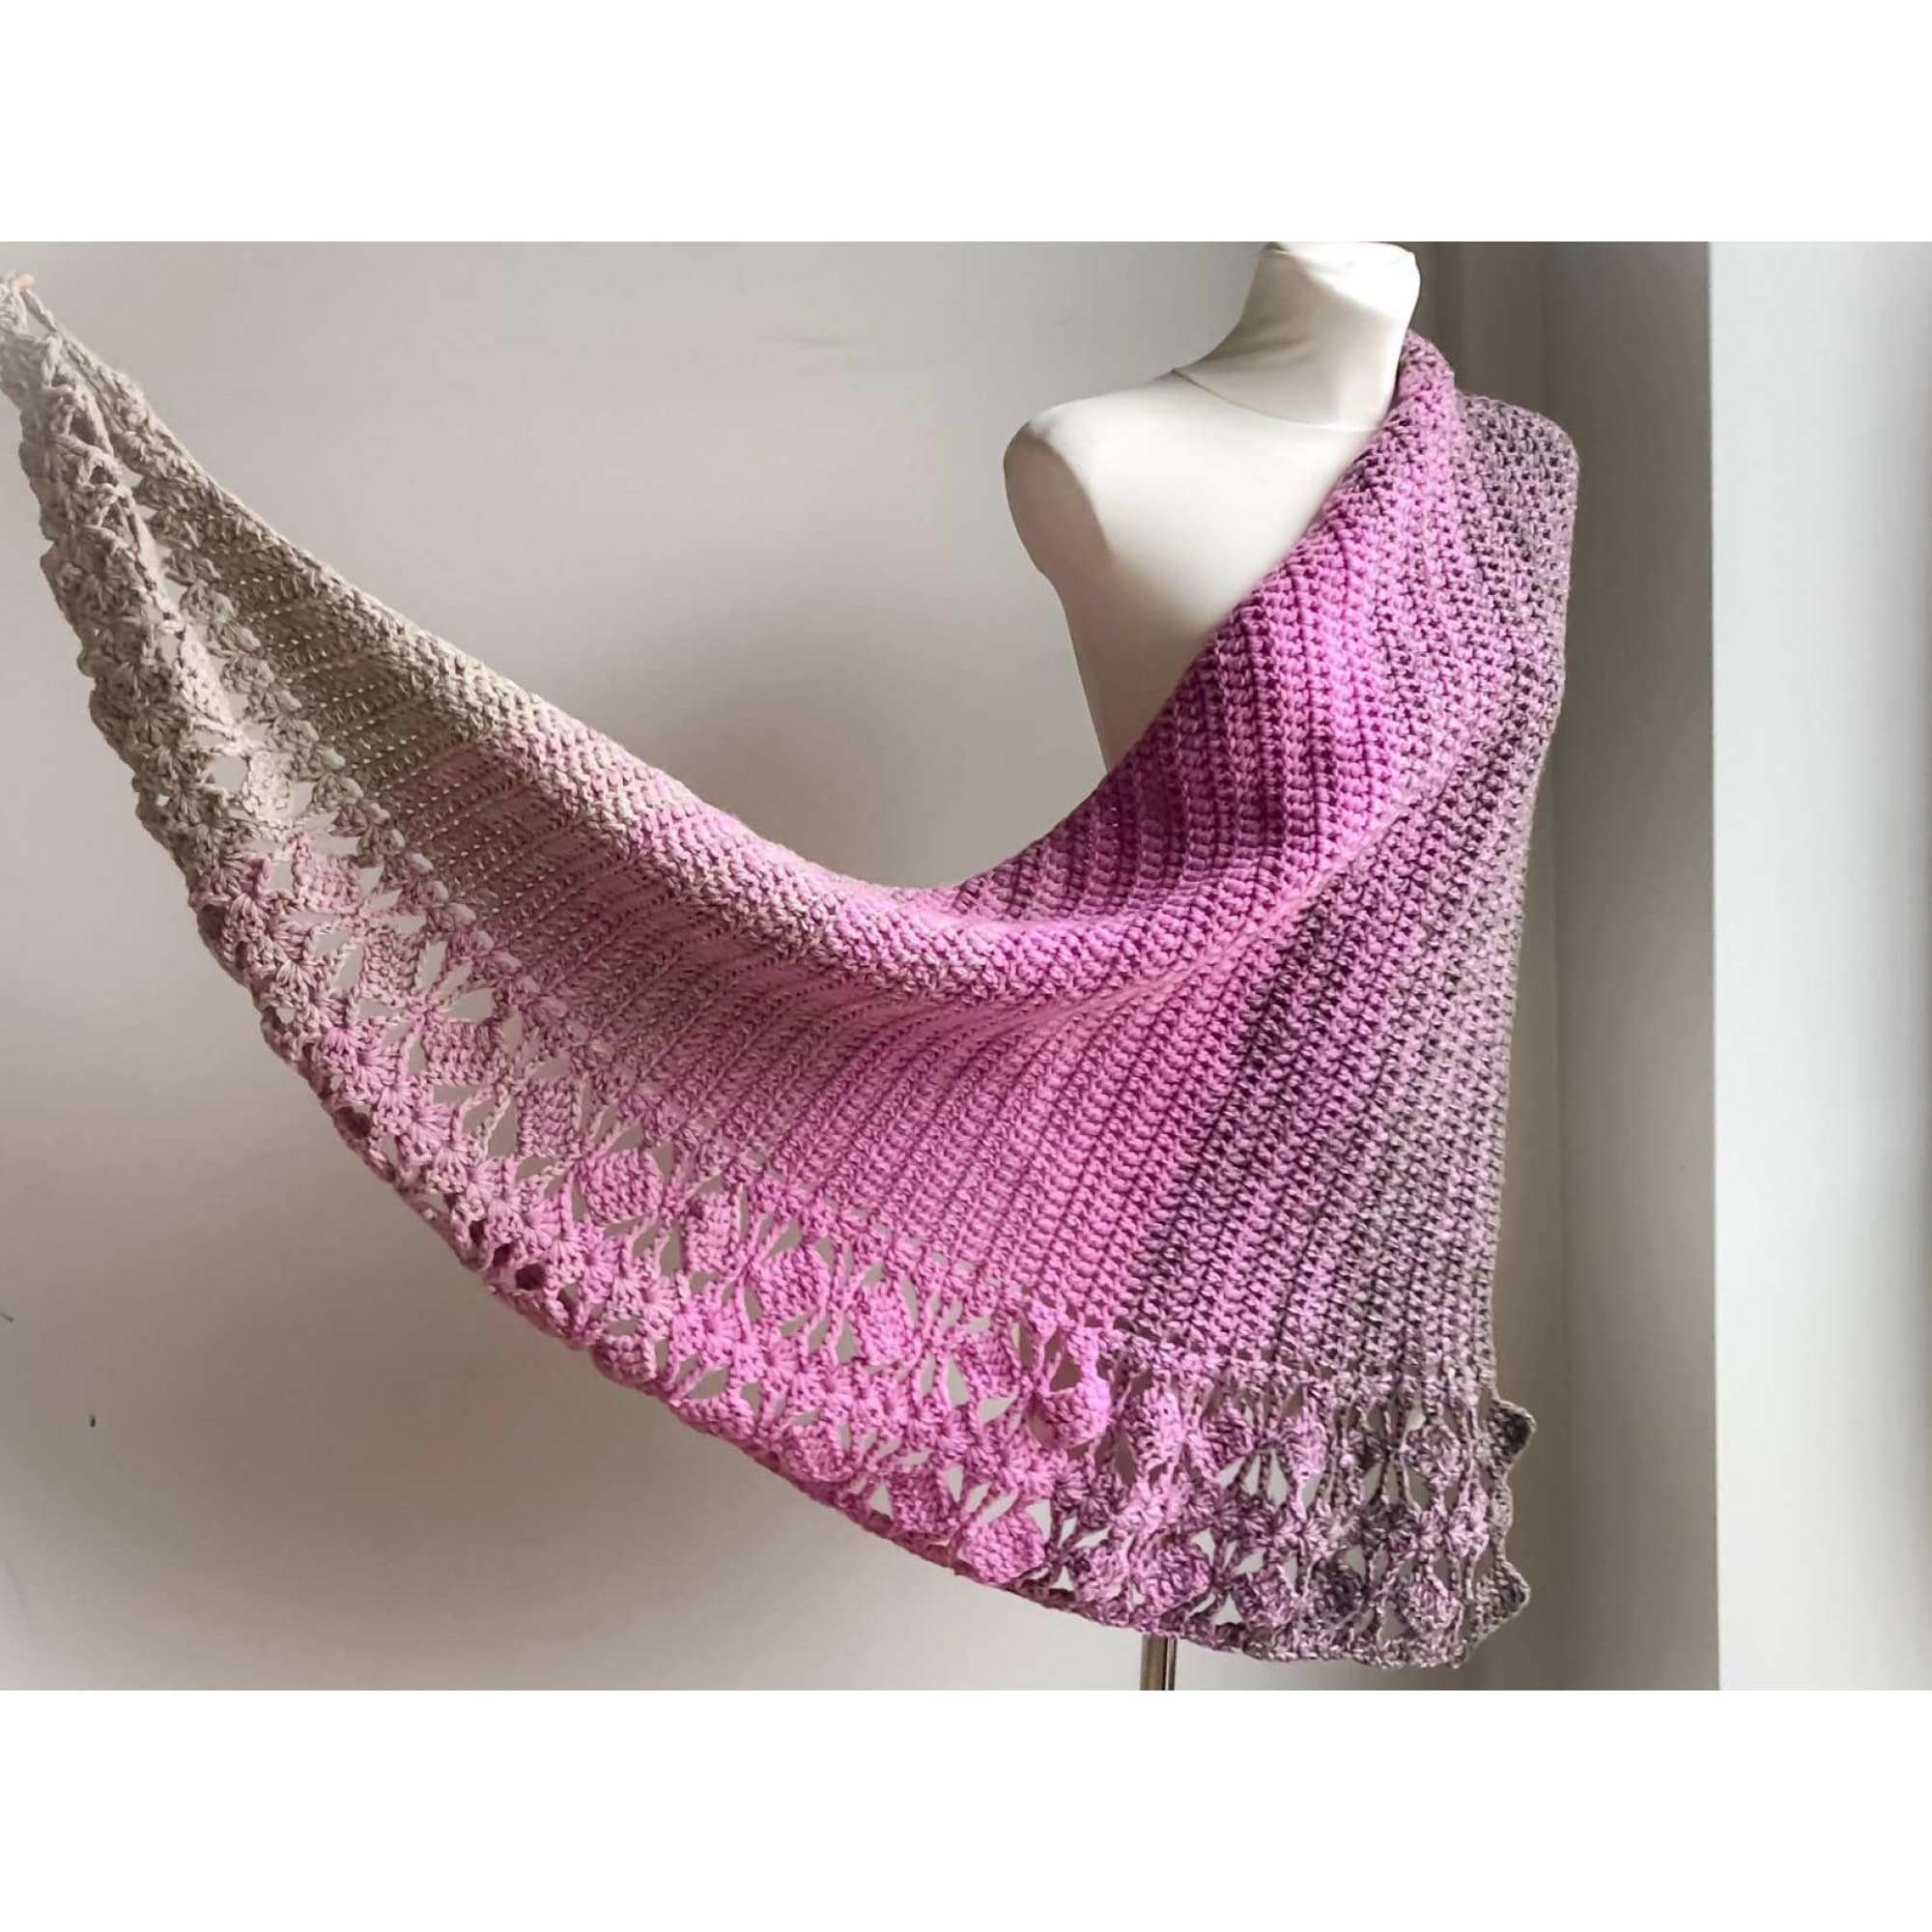 Crochet Shawl Pattern - Cerinu Shawl Wrap - TheMailoDesign - Scarves & Shawls - TheMailoDesign